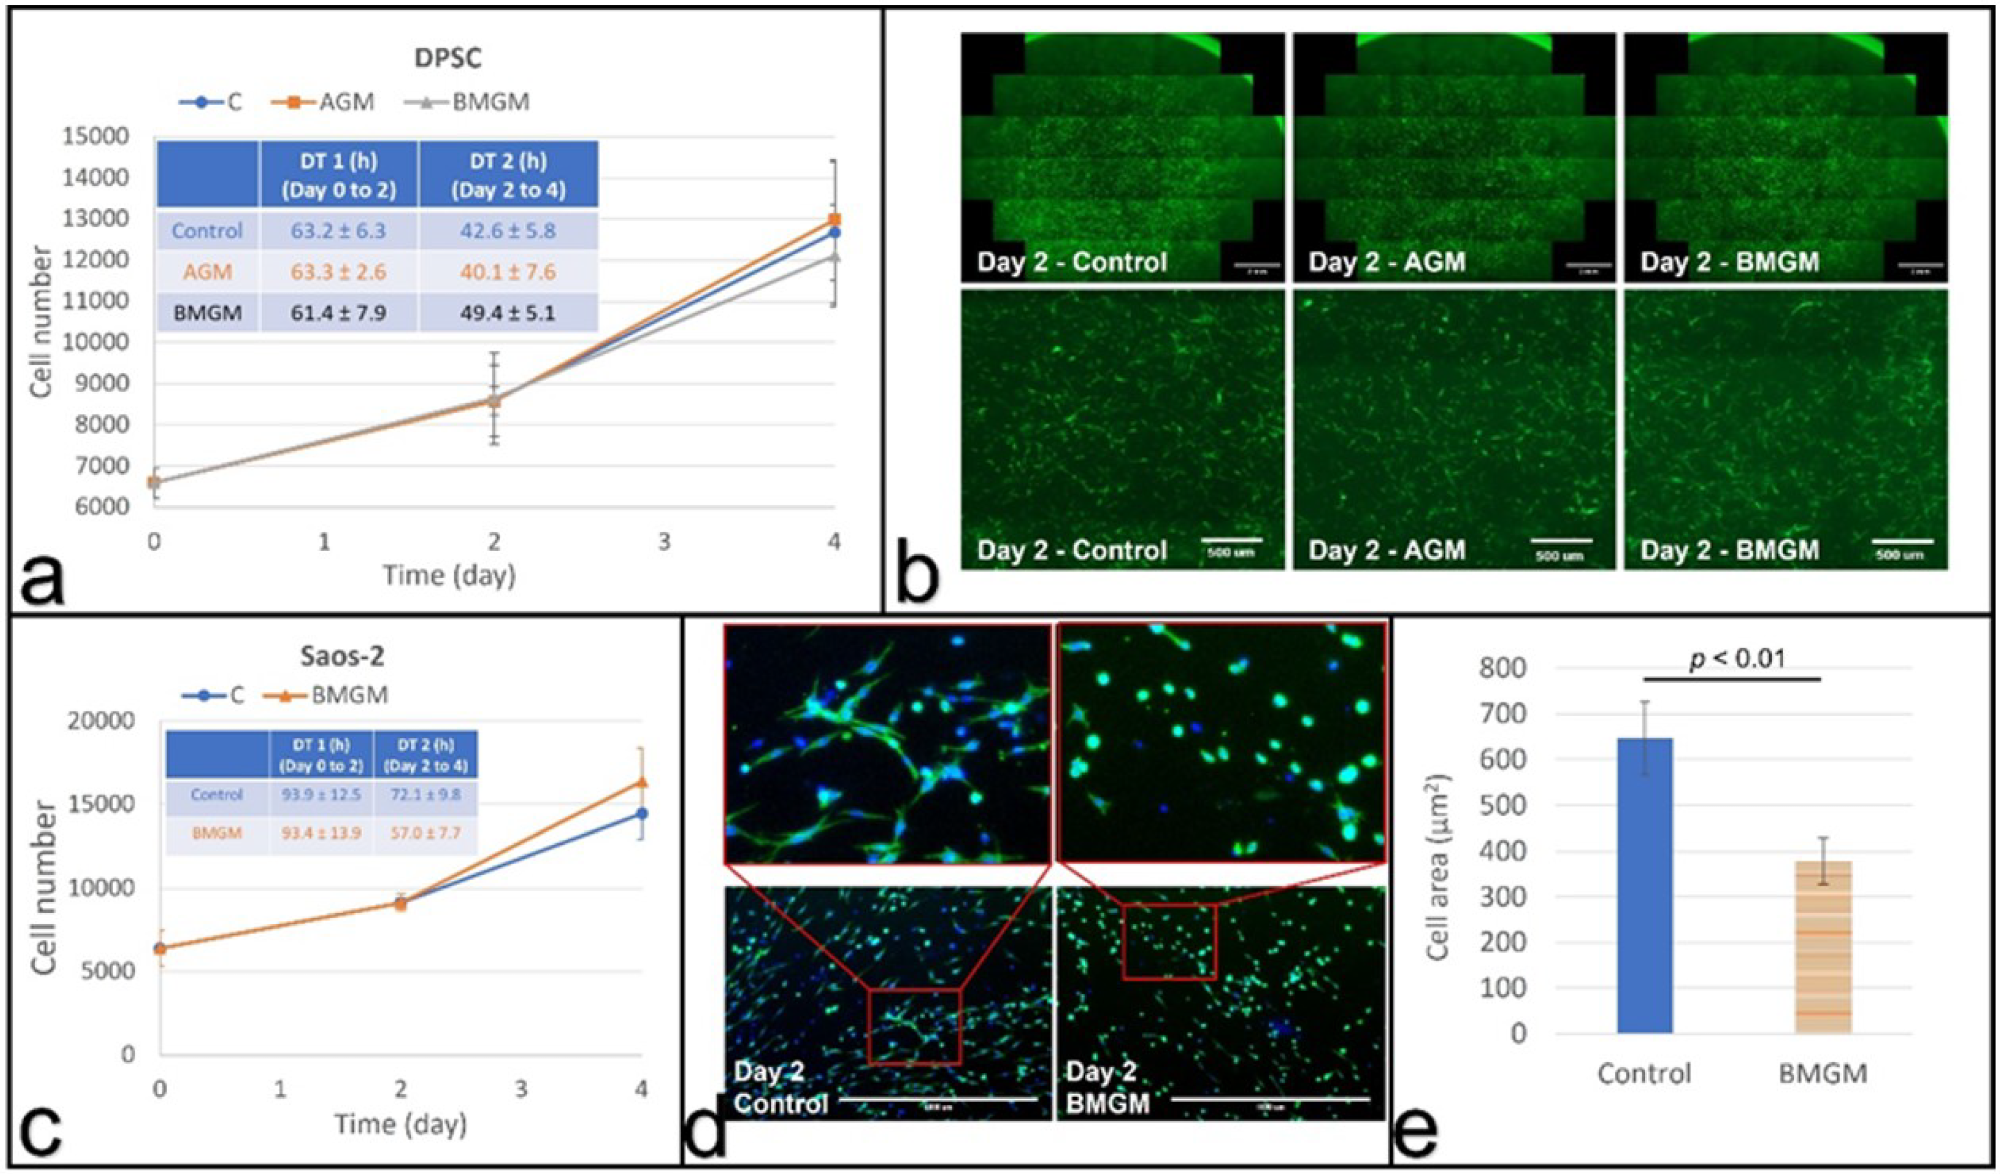 Cells cultured with bone graft materials on collagen substrates: (a) growth curves and calculated (inset) doubling times of DPSCs; (b) fluorescence images of DPSCs with the bottom row (scale bar: 500 µm) being magnified view of the area in the square shown in top row (scale bar: 2 mm); (c) growth curves and doubling times of Saos-2 cells; (d) fluorescence images of Saos-2 cells with the top row (scale bar: 1000 µm) being magnified view of the bottom row; (e) Comparison of the average cell area of Saos-2 cells at day 2.